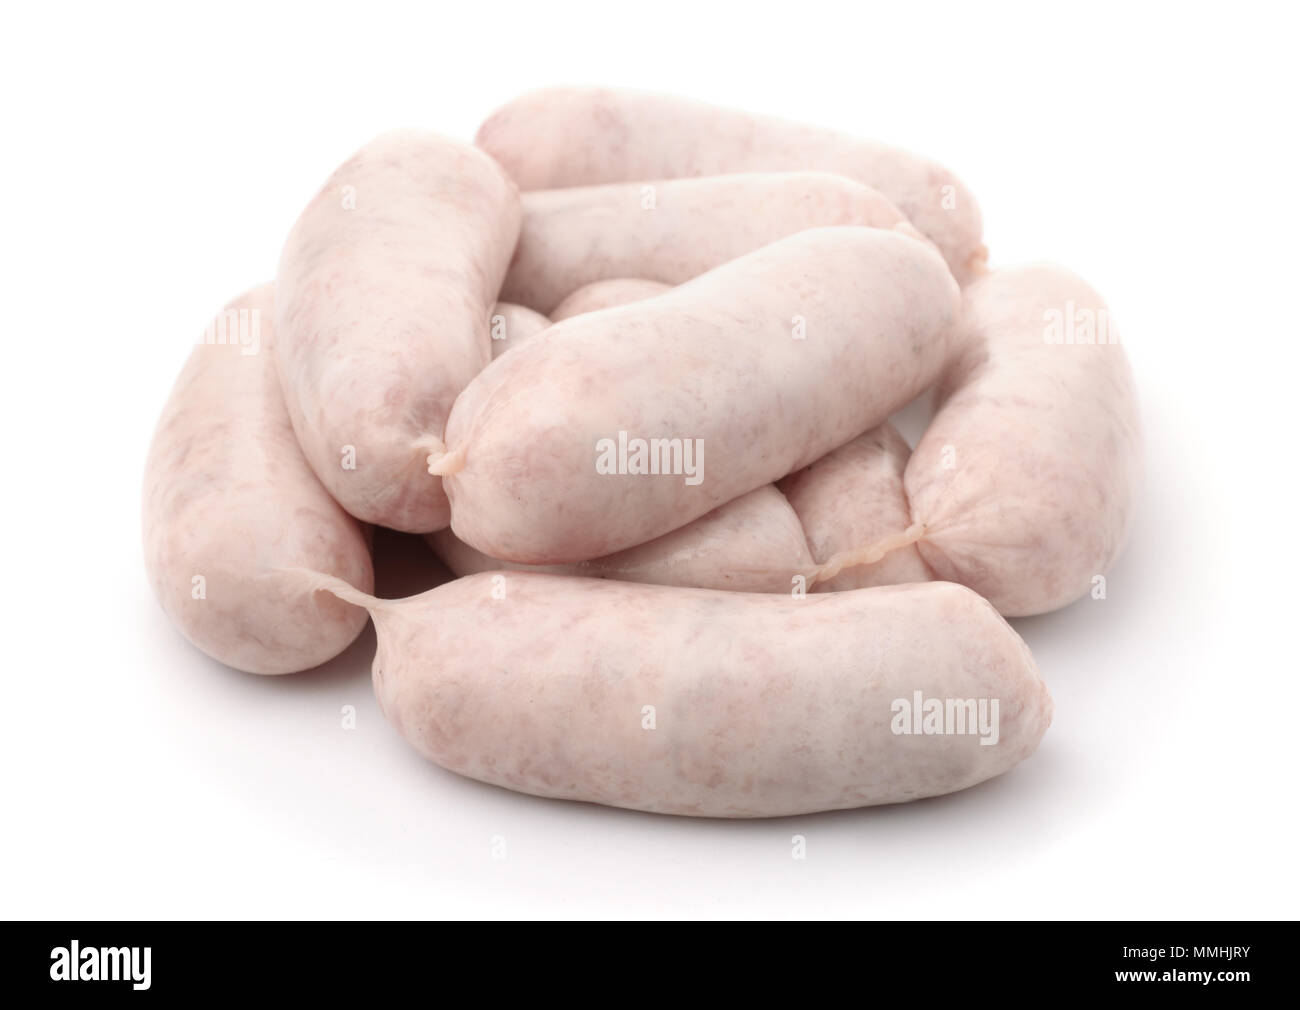 Pile of raw traditional bavarian white sausages isolated on white Stock Photo